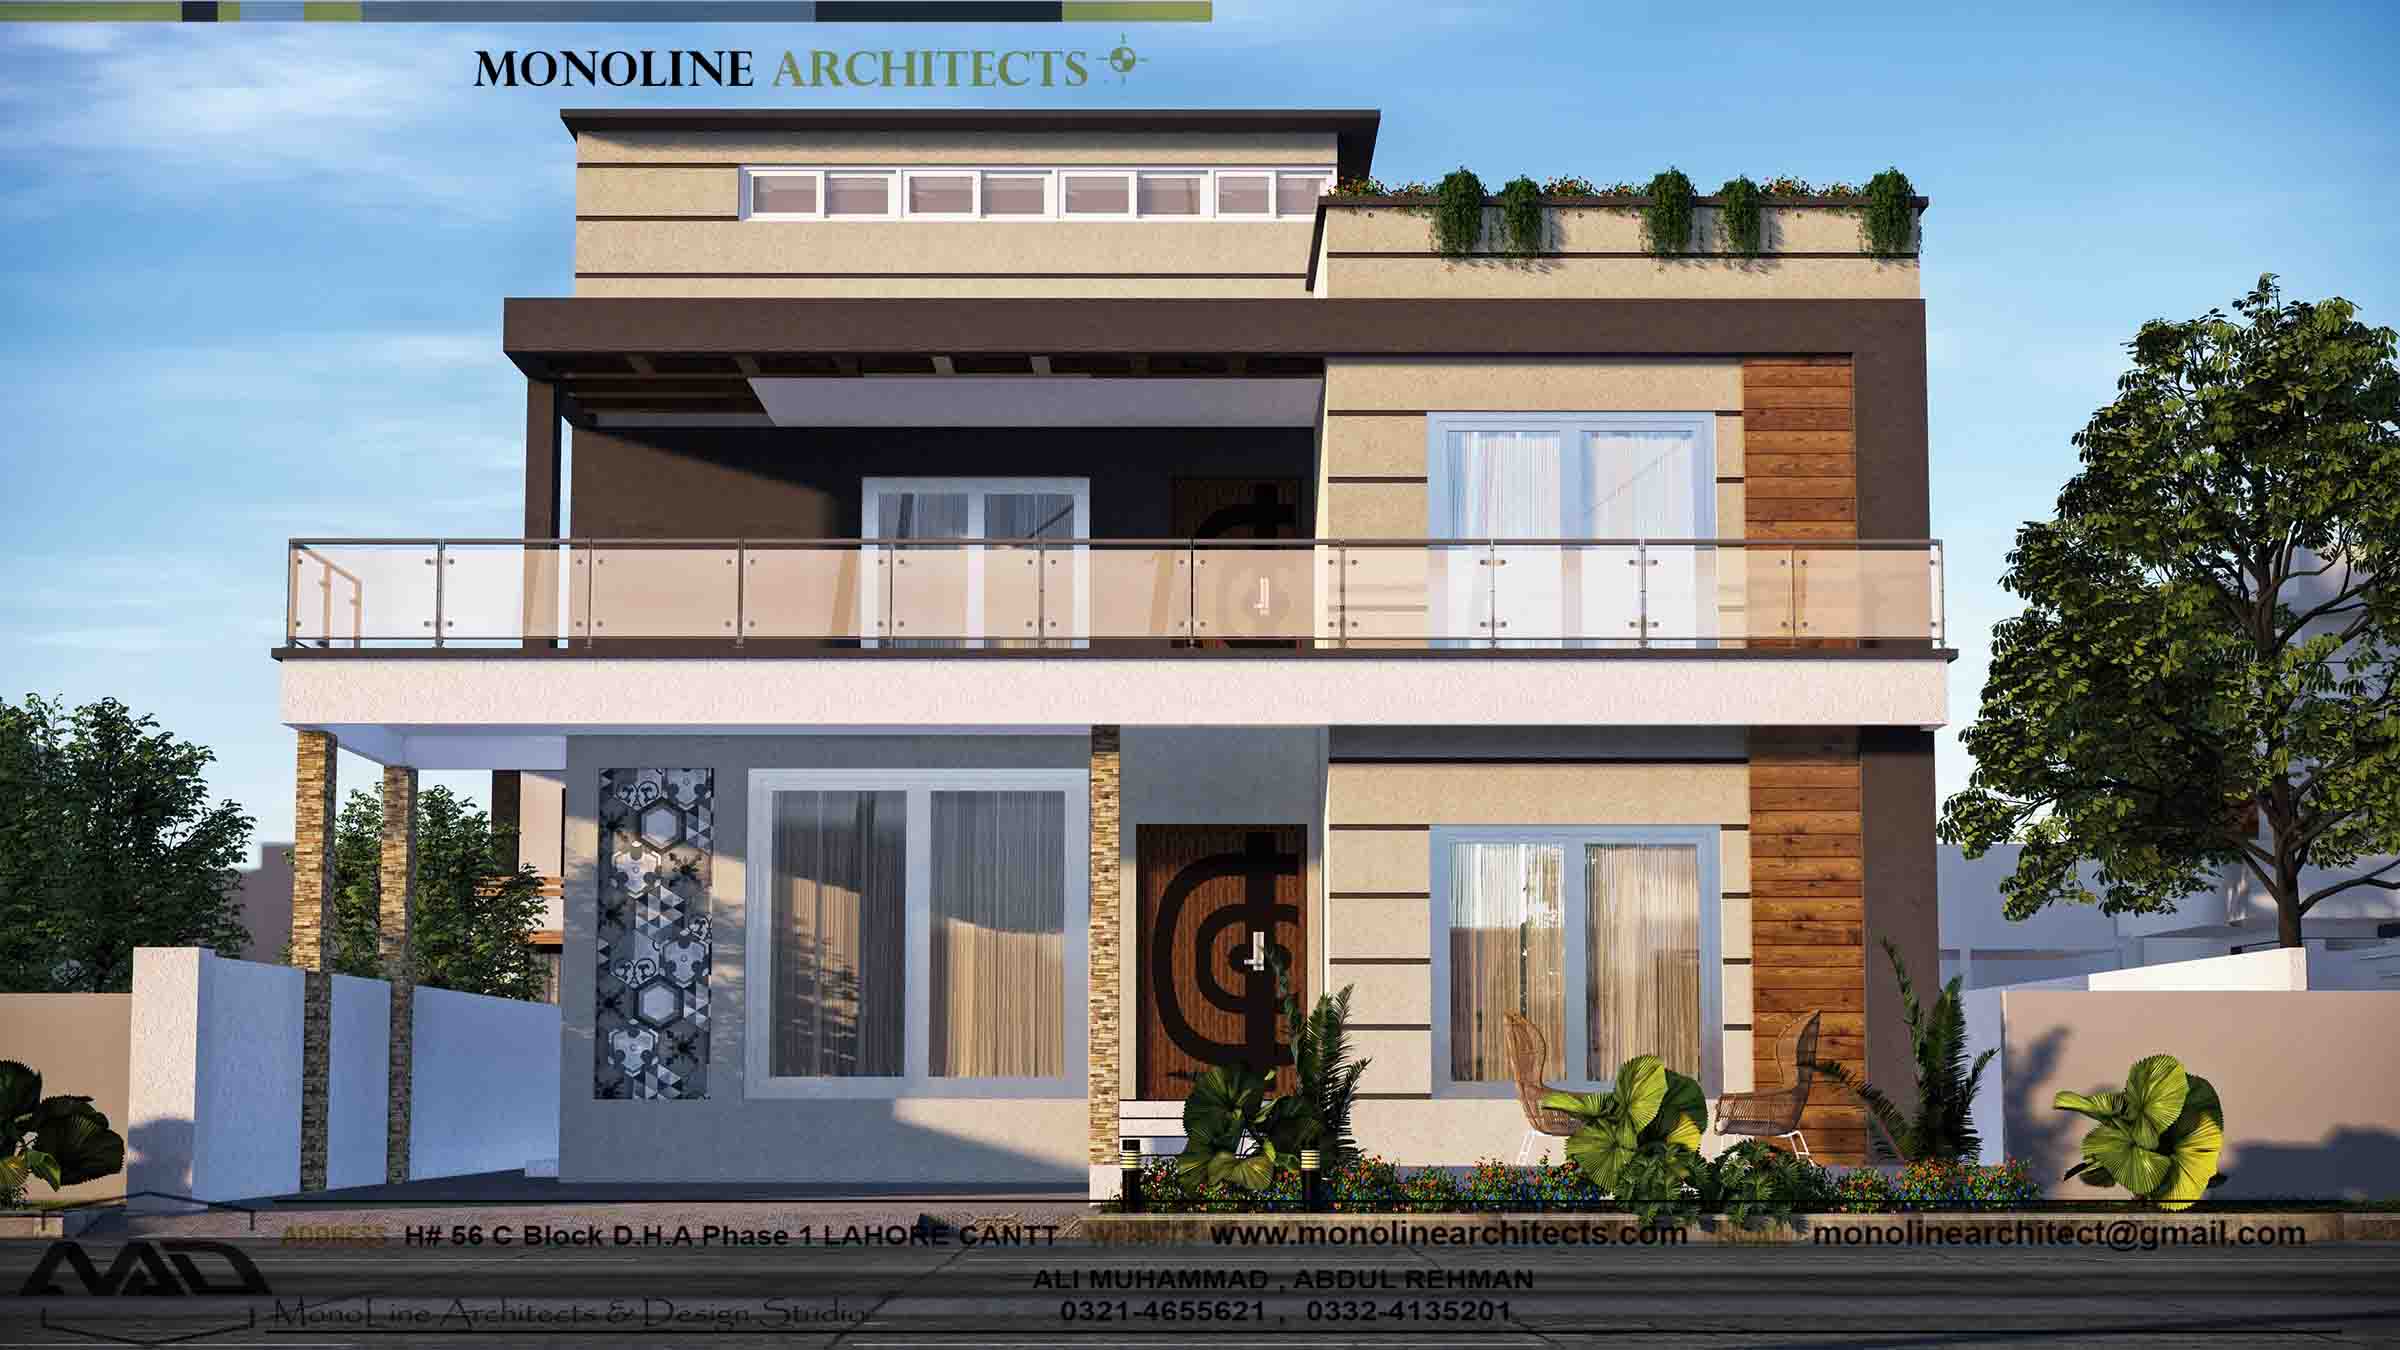 1 kanal house design front elevation by monoline architects